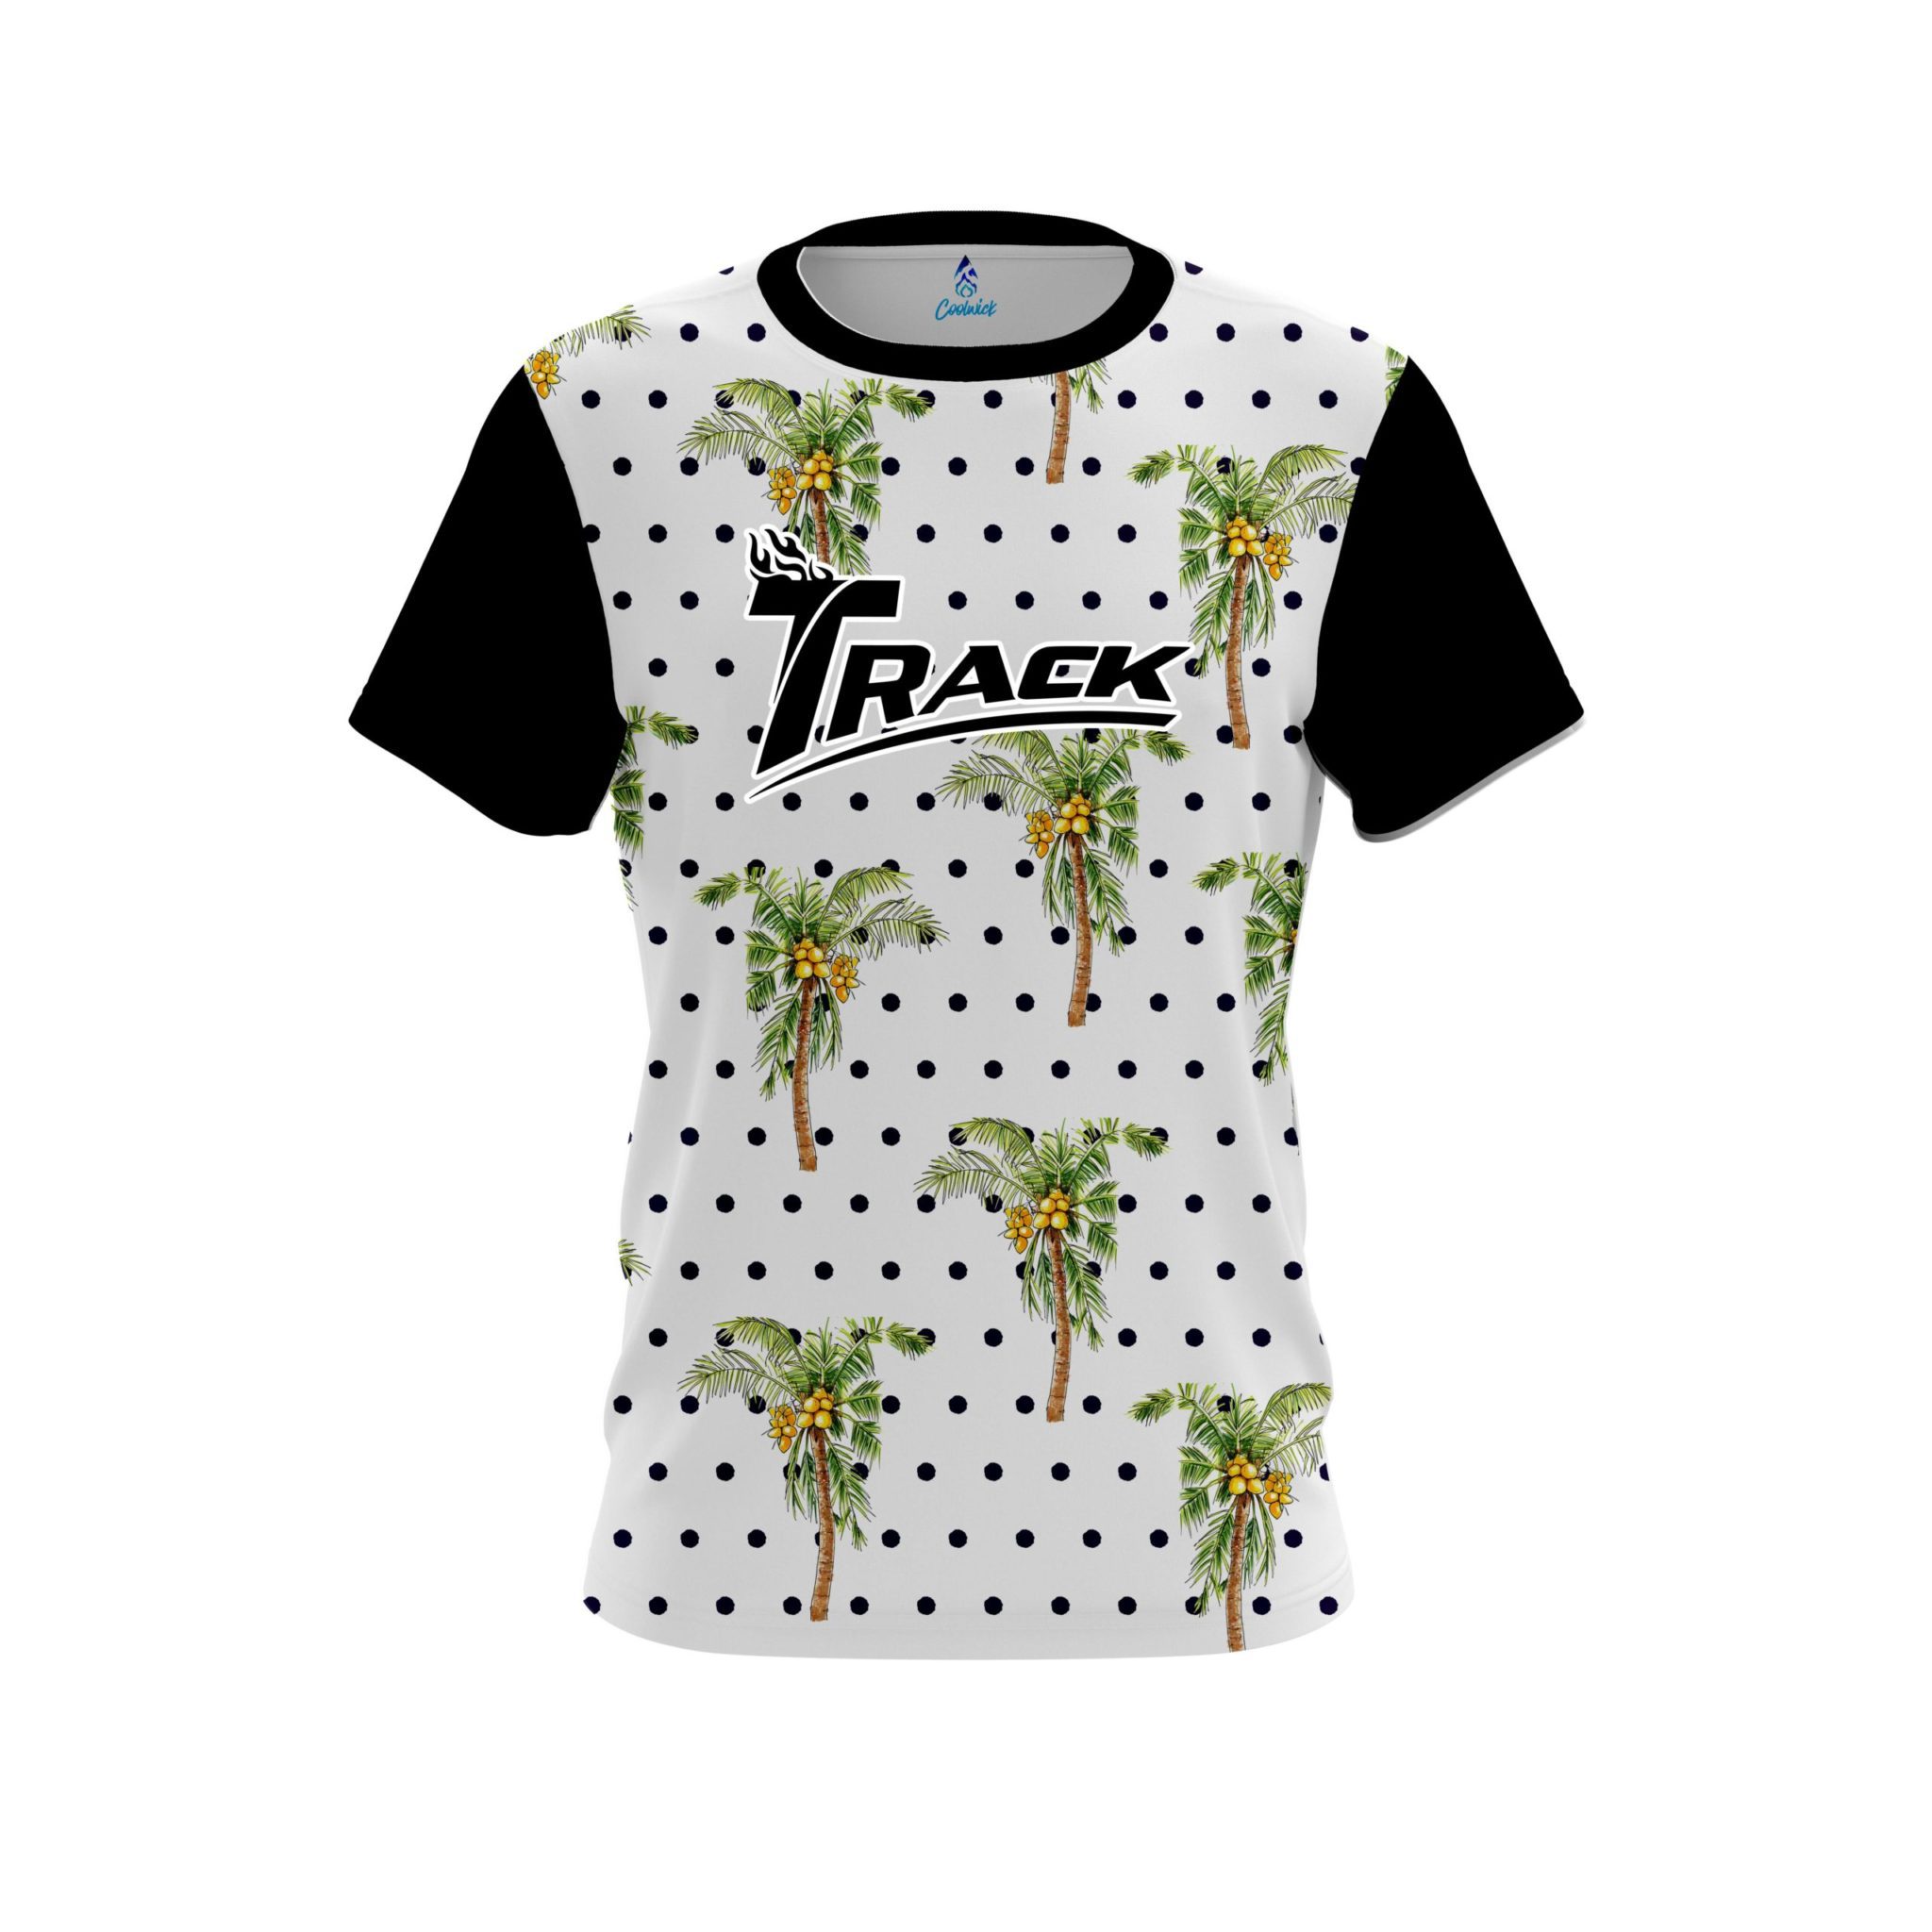 Track Polka Dots Palm Trees CoolWick Bowling Jersey